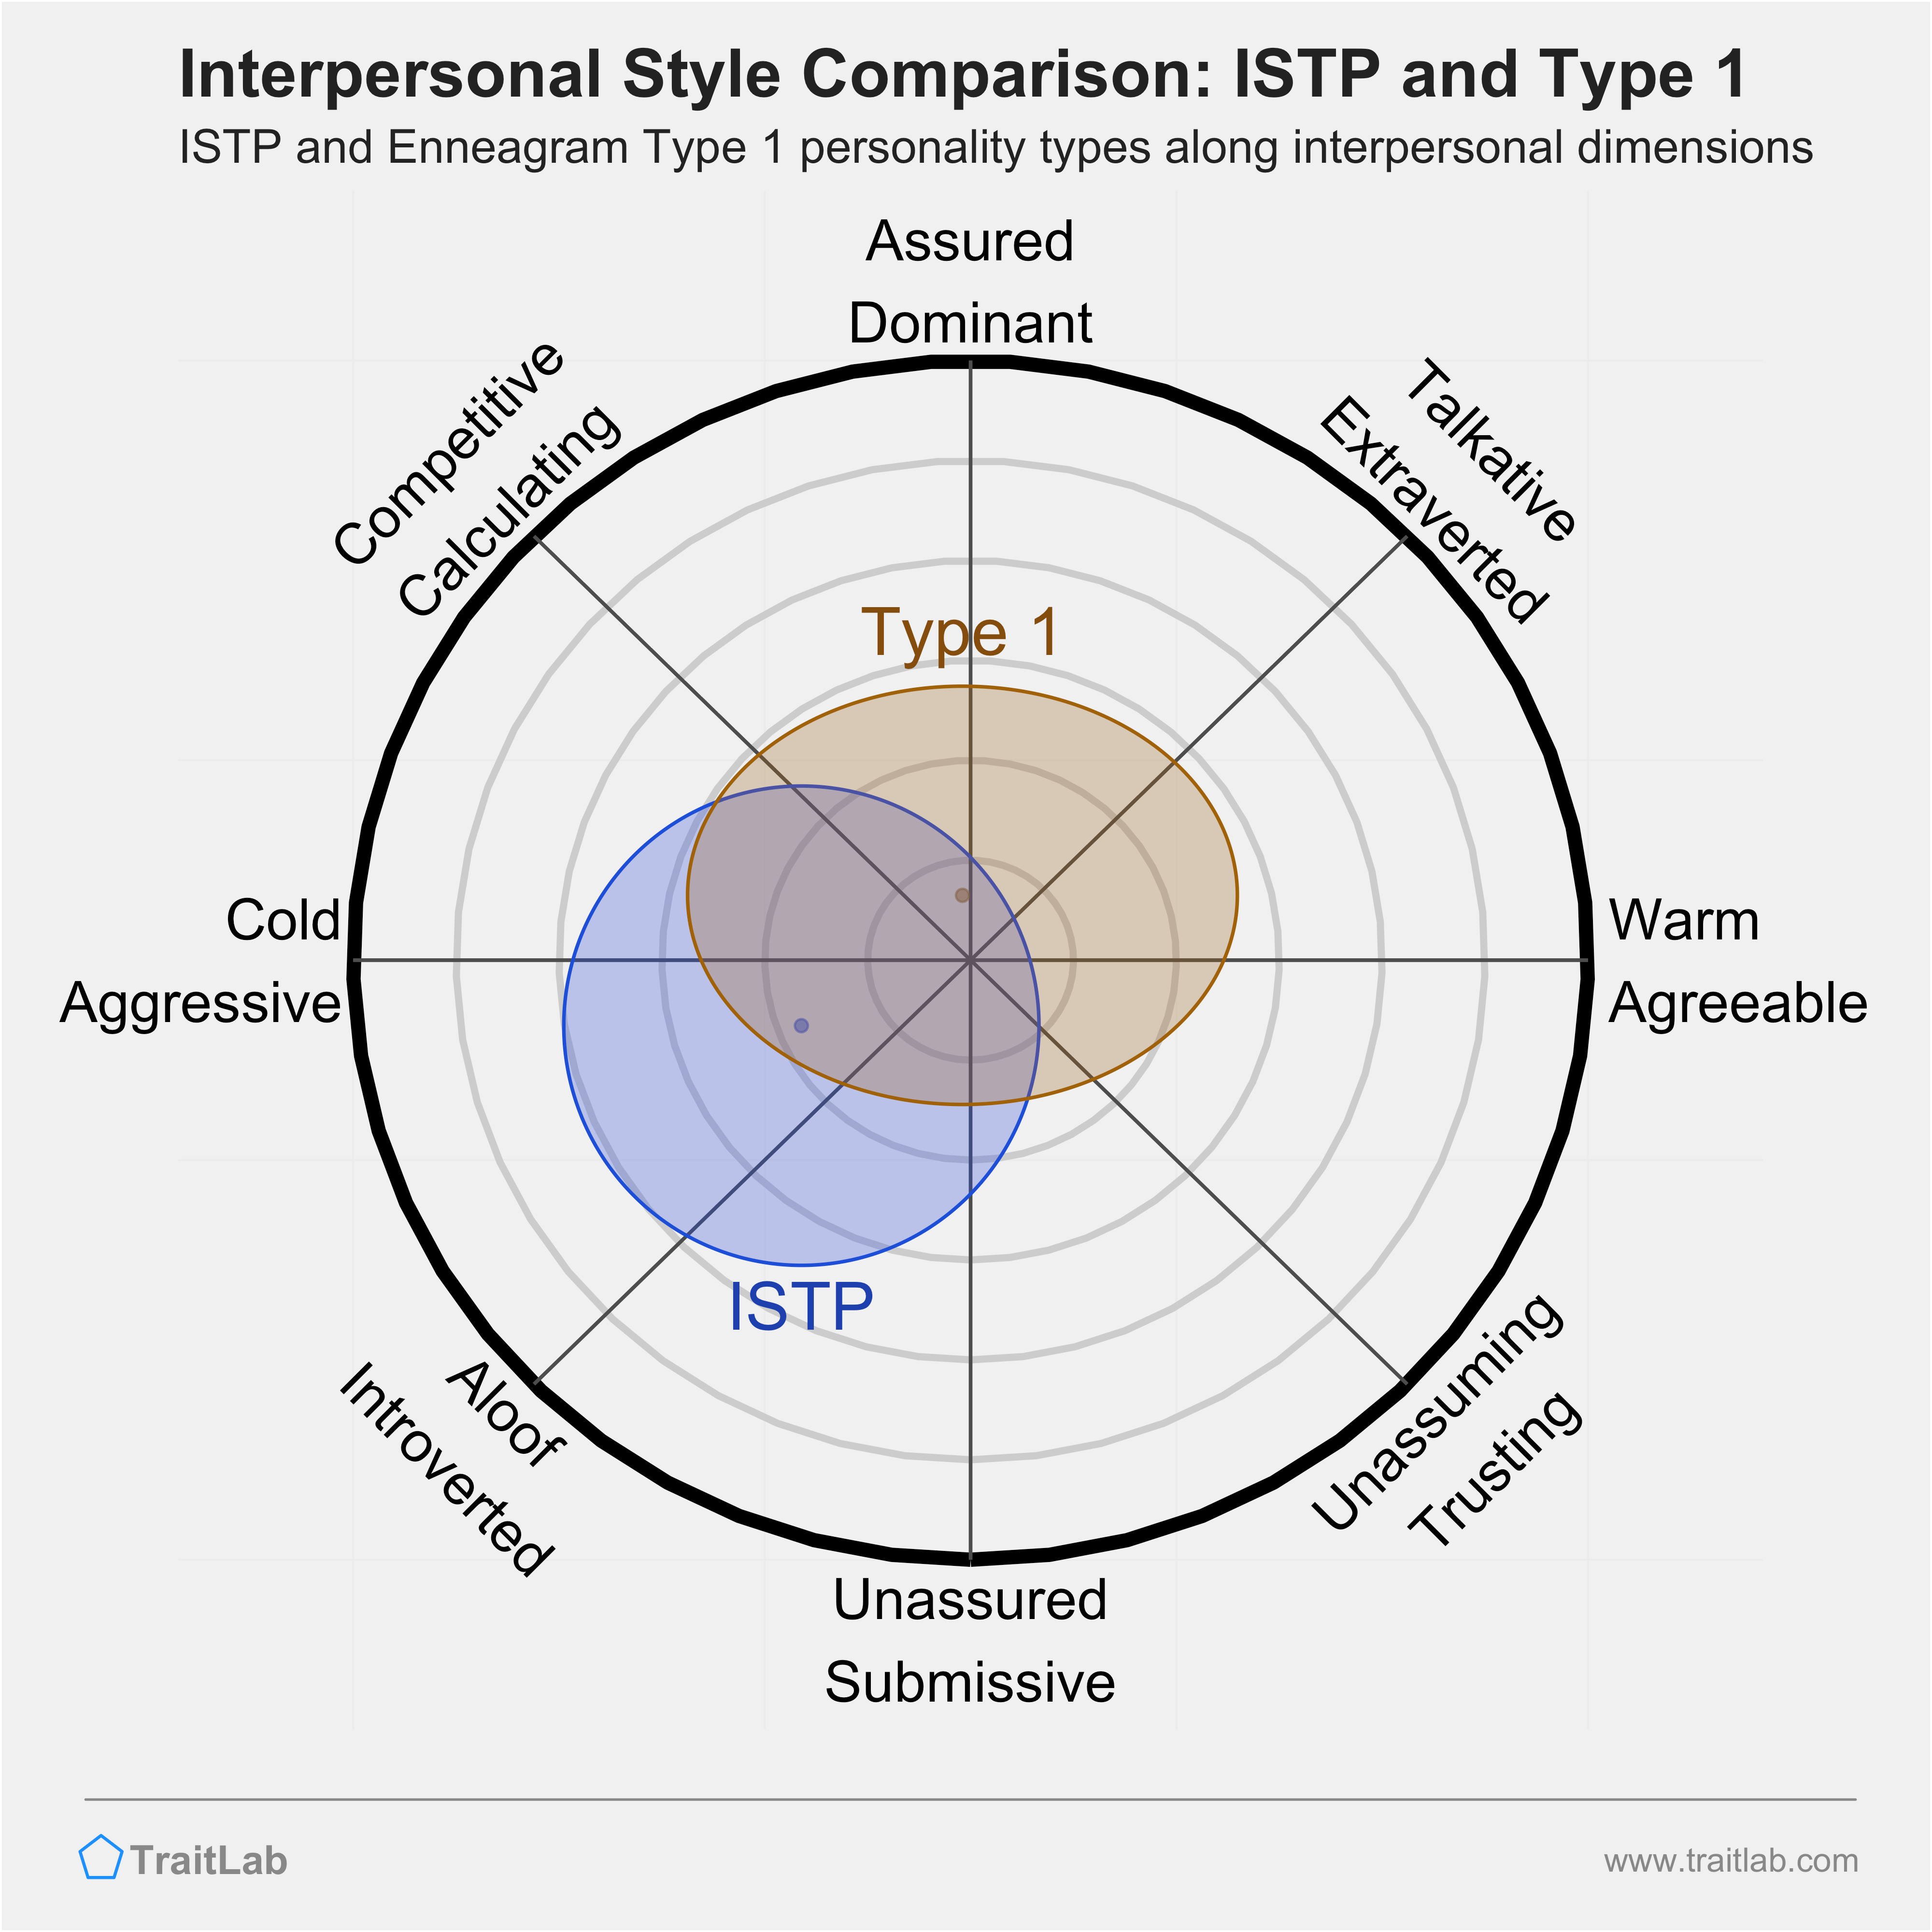 Enneagram ISTP and Type 1 comparison across interpersonal dimensions